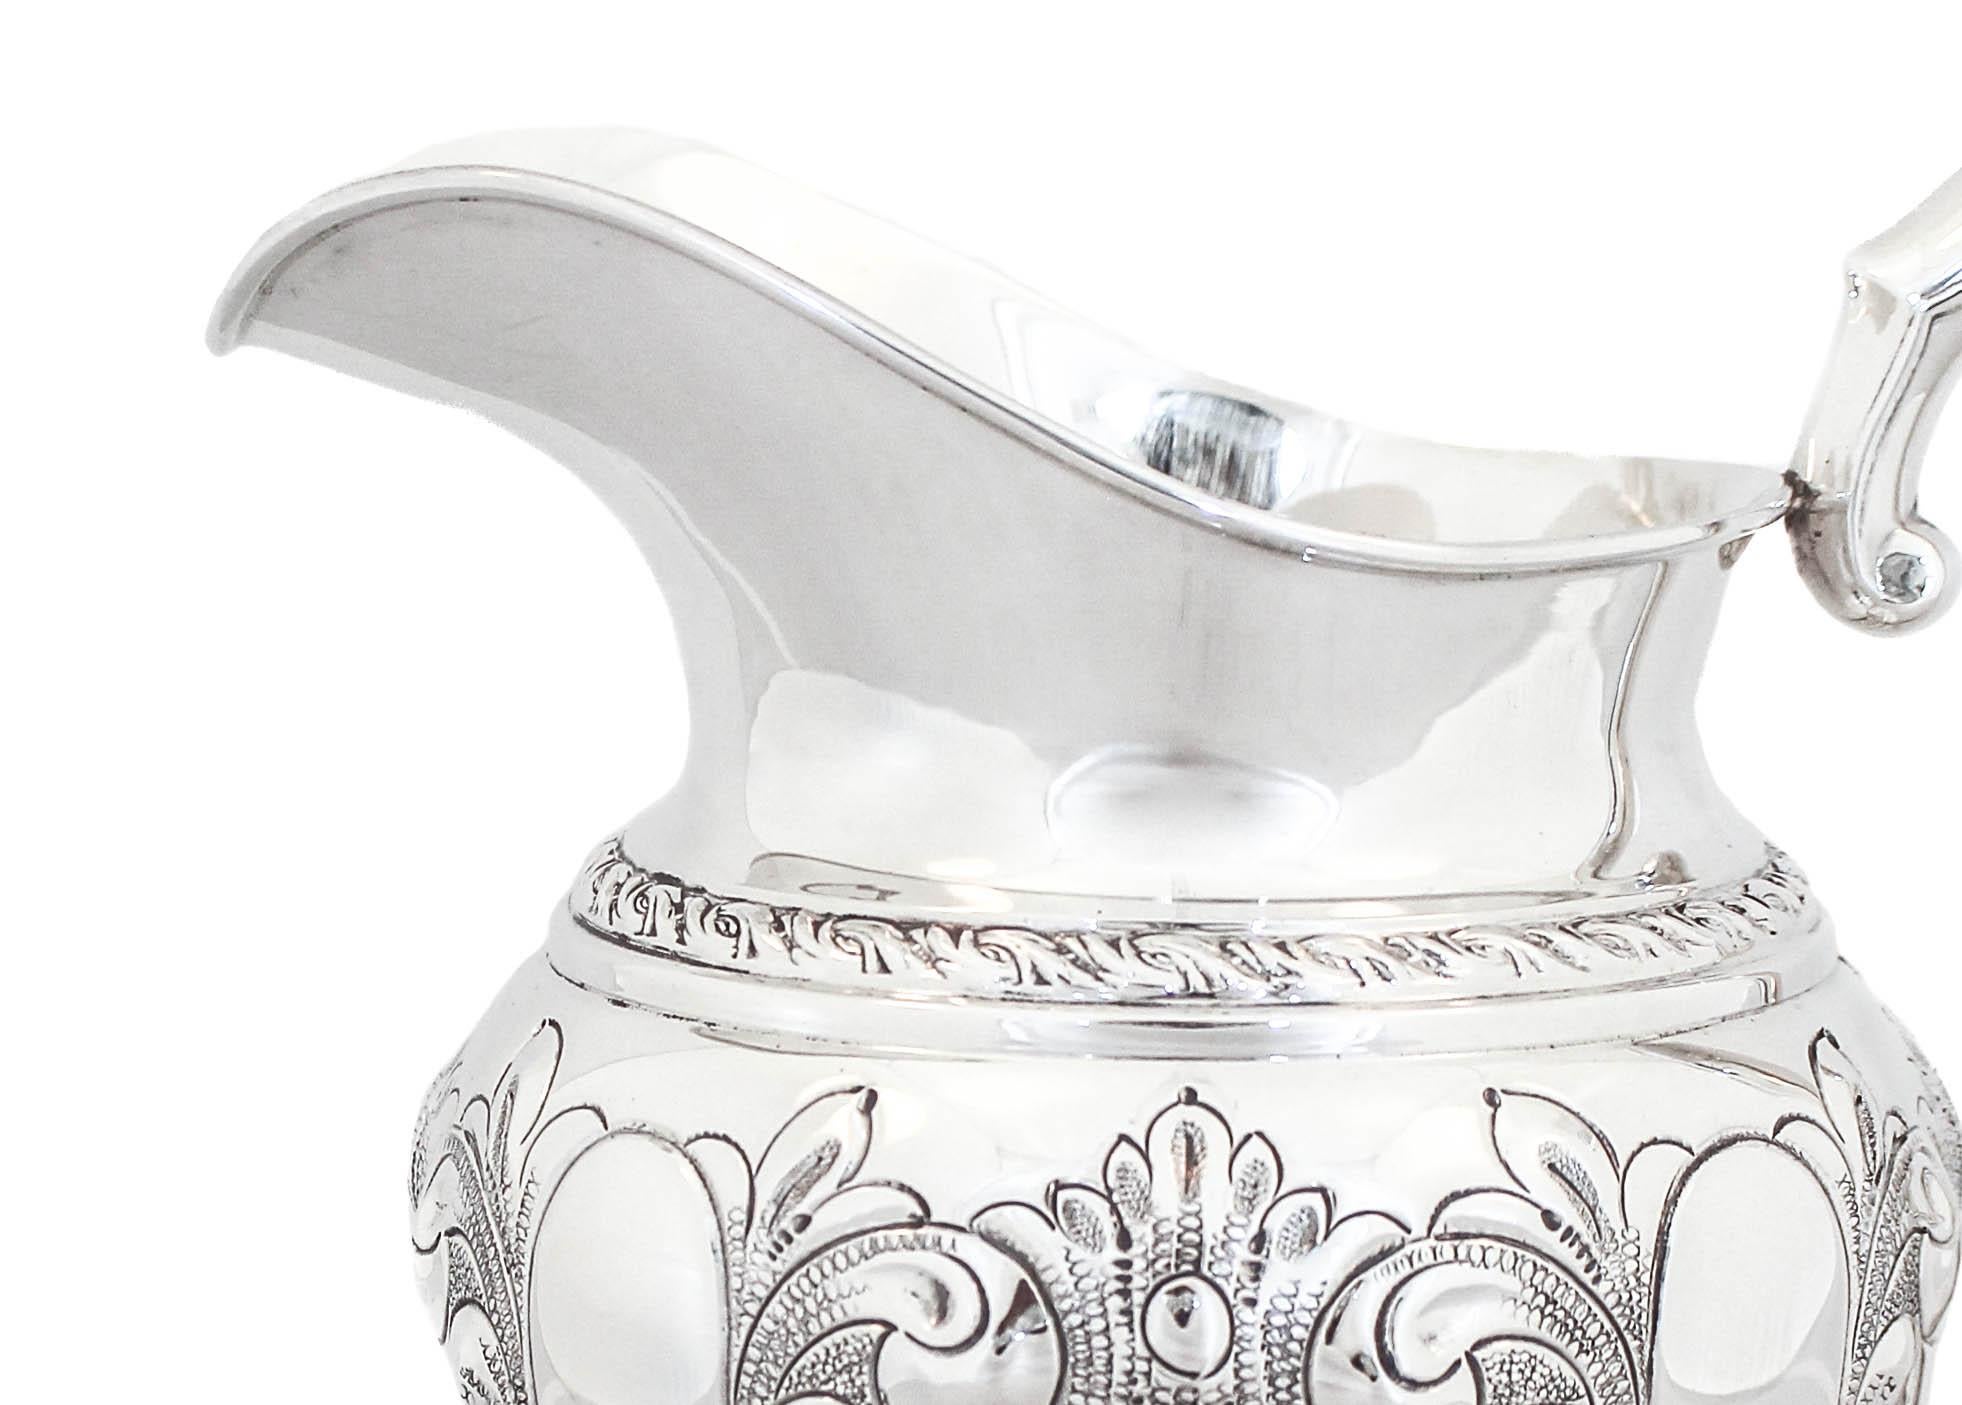 Being offered is a sterling silver water pitcher by Amston Silver Company of Meriden Connecticut.  It is hand-chased (signed hand-chased) with flowers, leaves and paisleys all around the body.  There is a gadroon around the base as well as the neck.